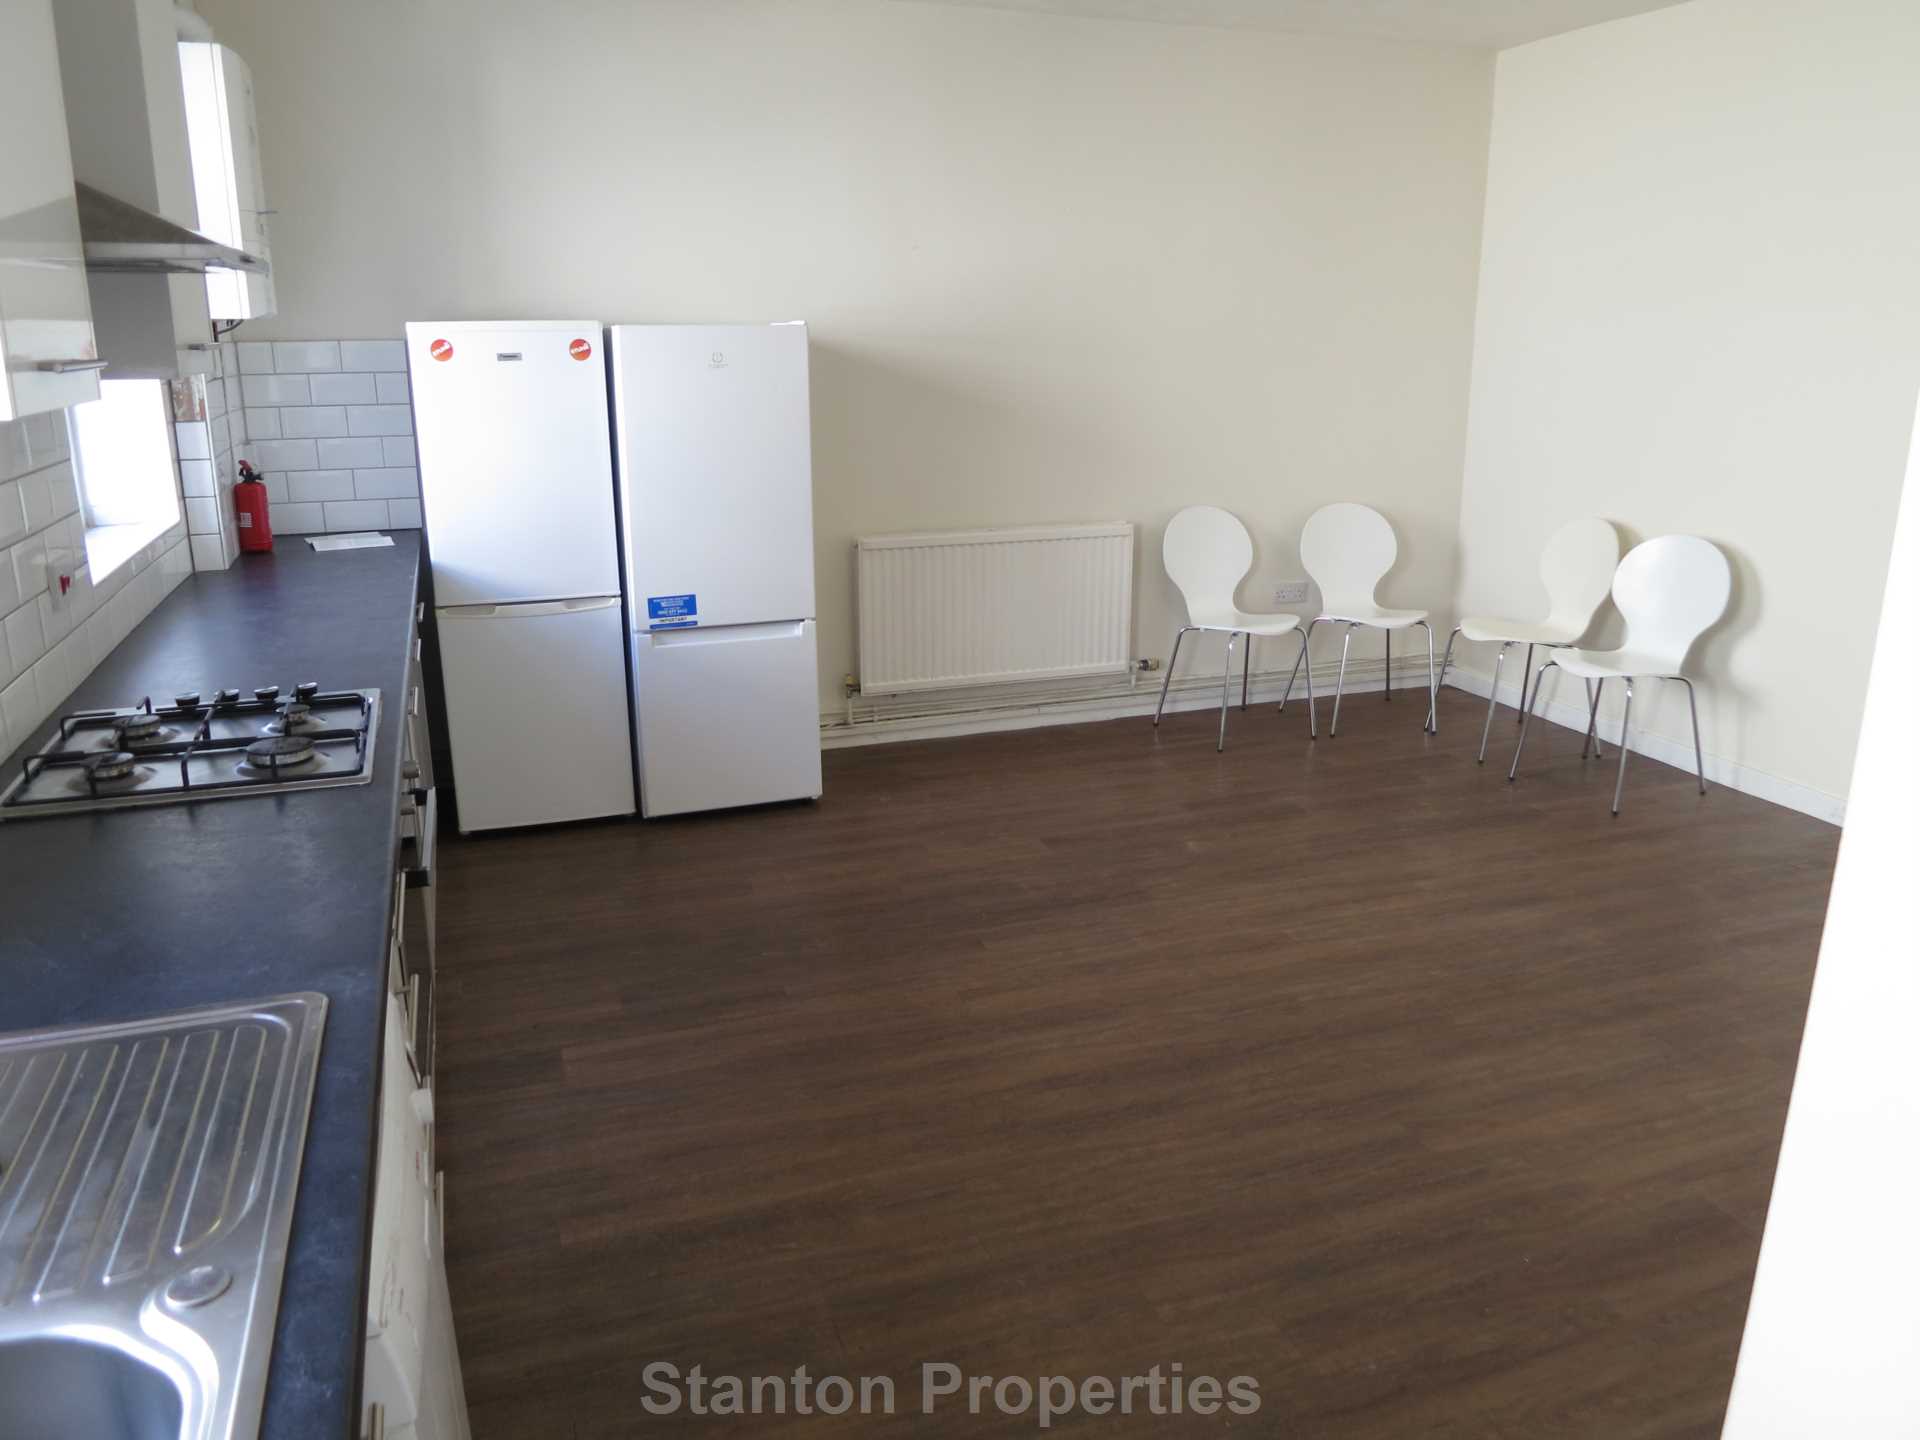 See Video Tour, £120 pppw, Copson Street, Withington, Image 5